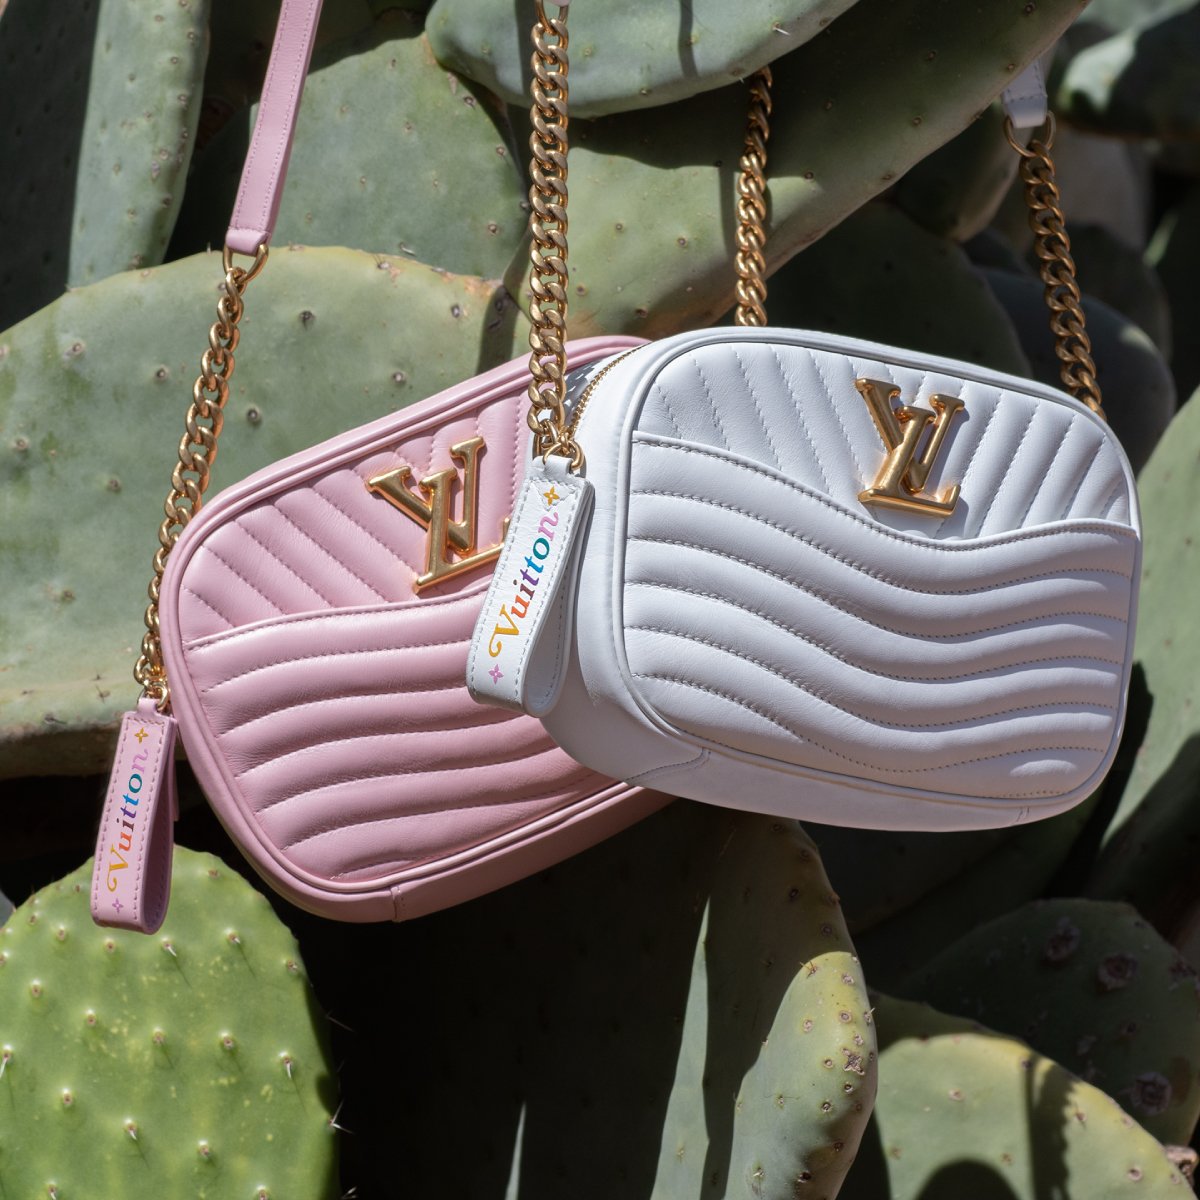 Louis Vuitton: The New Wave Camera Bag For Mother's Day